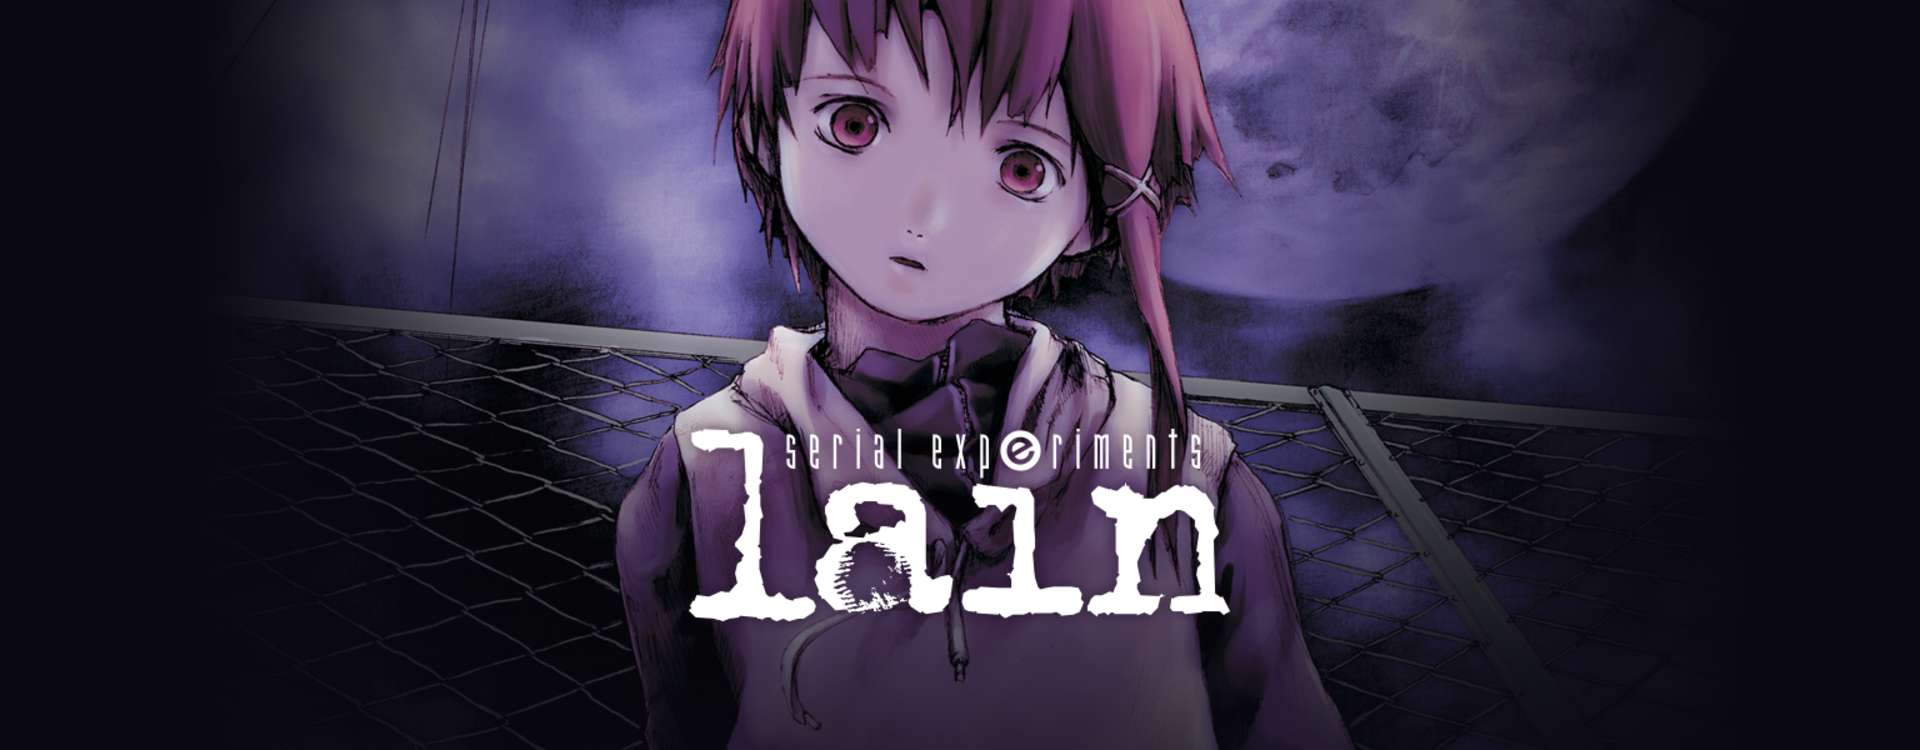 Serial Experiments Lain English Dub Torrent Download